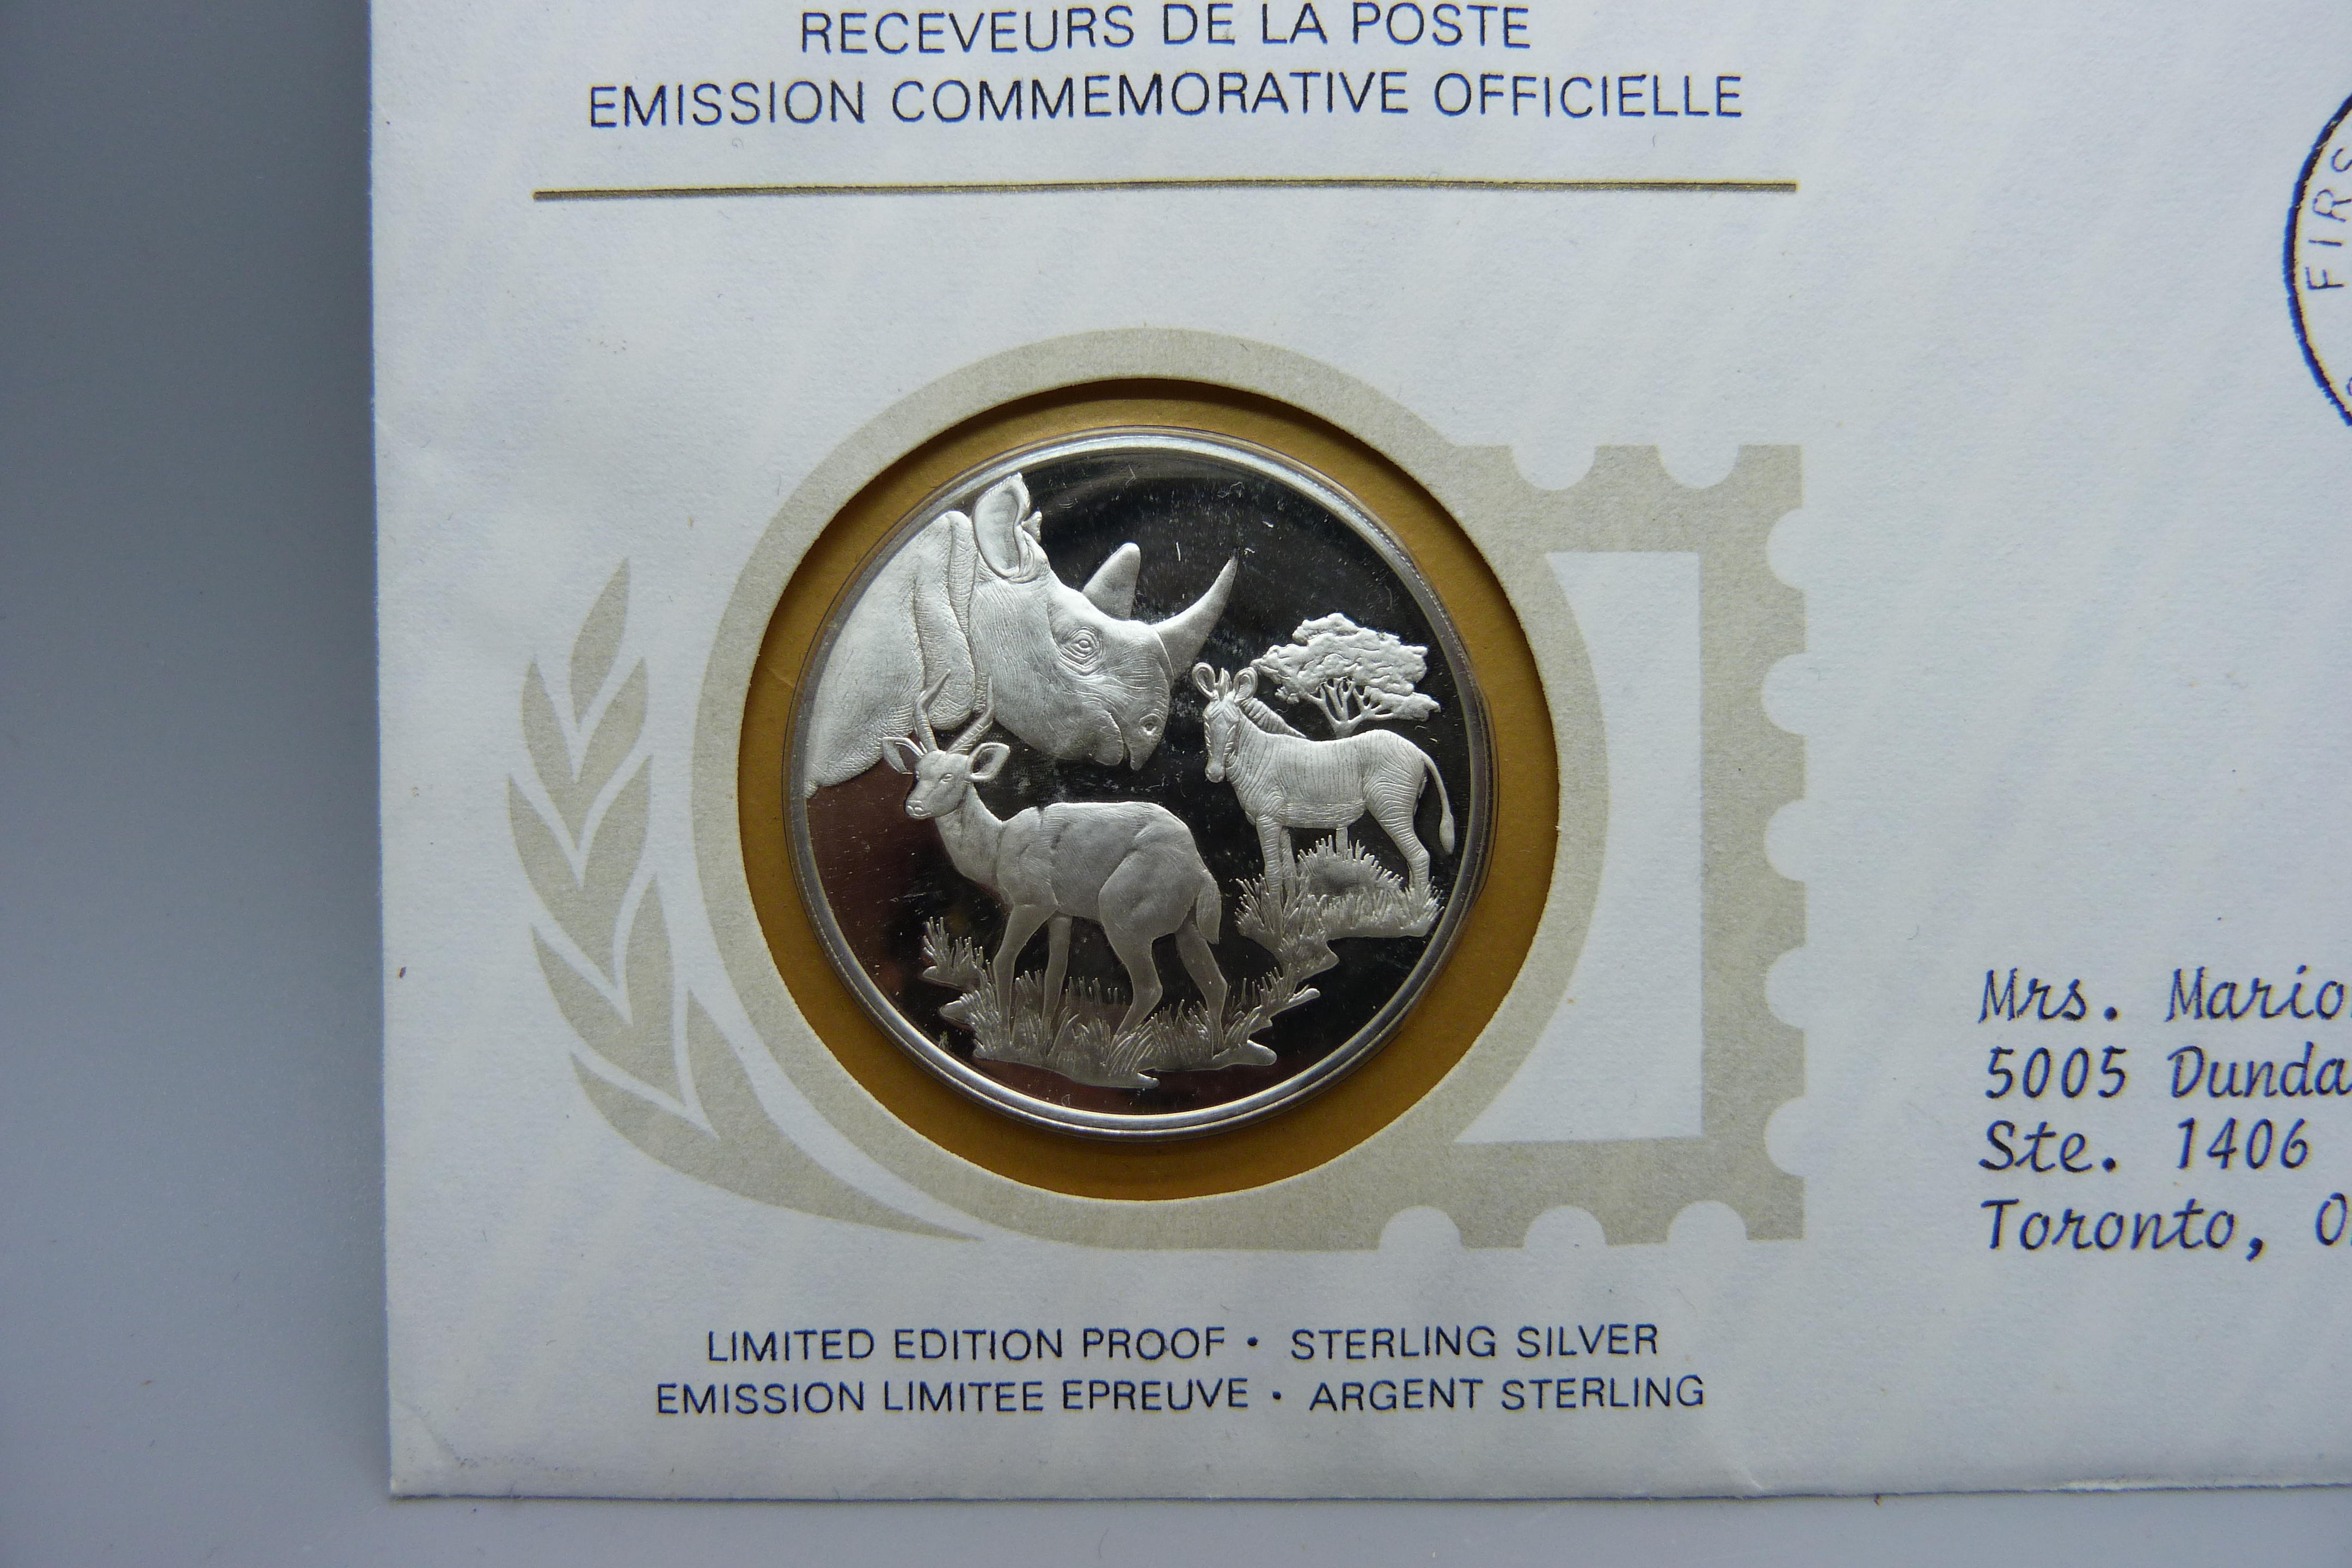 A Limited Edition sterling silver International Society of Postmasters Official Commemorative Issue, - Image 2 of 3